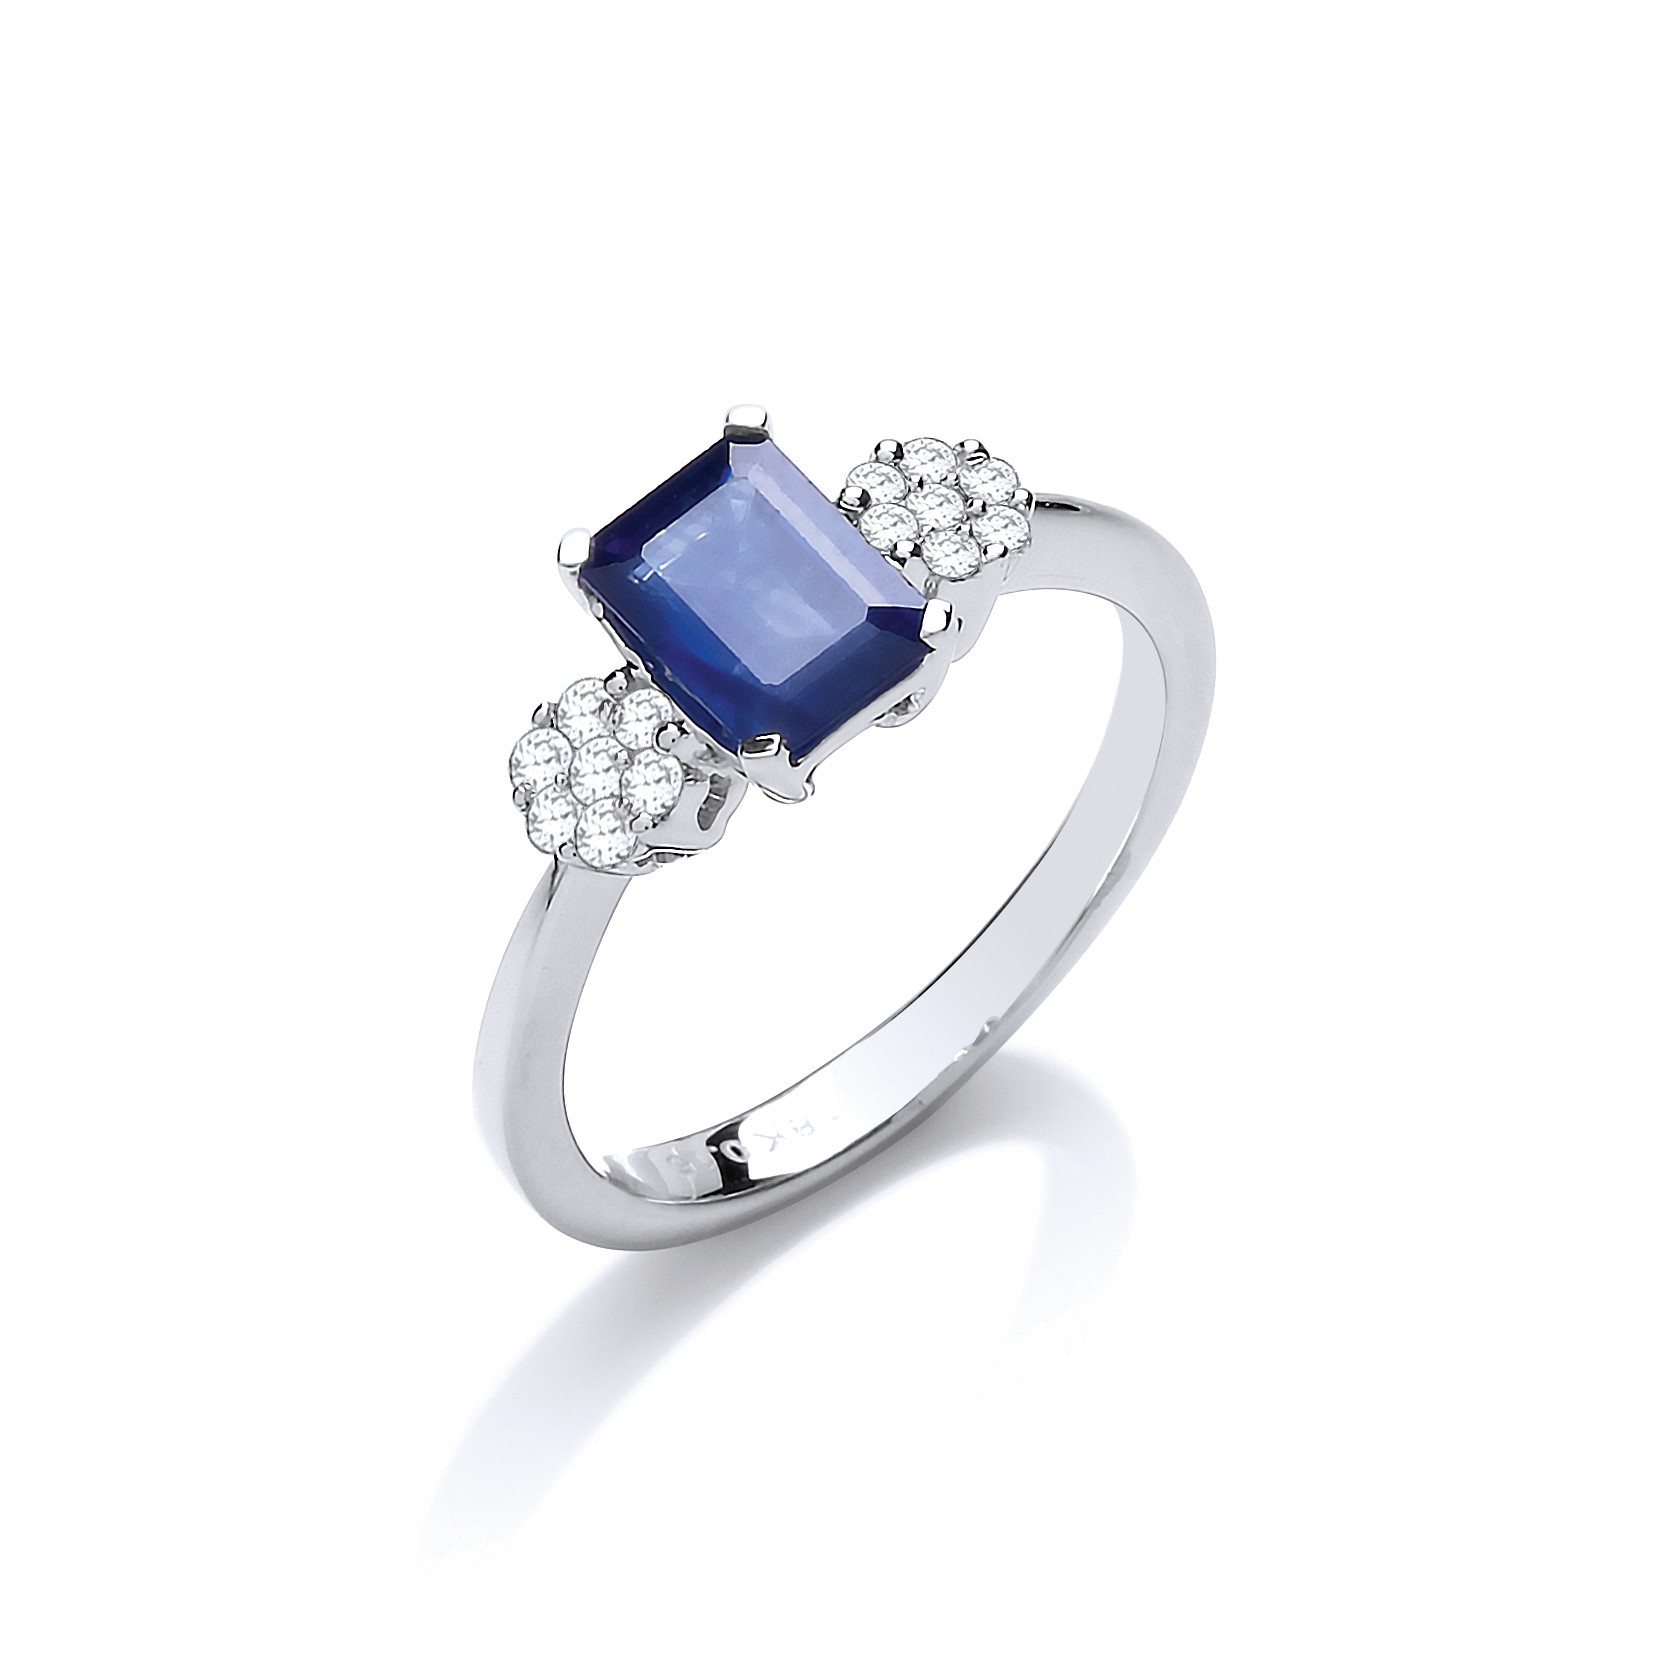 1.75 Carat Emerald Cut Sapphire Stone With Round diamond As A Side Stone